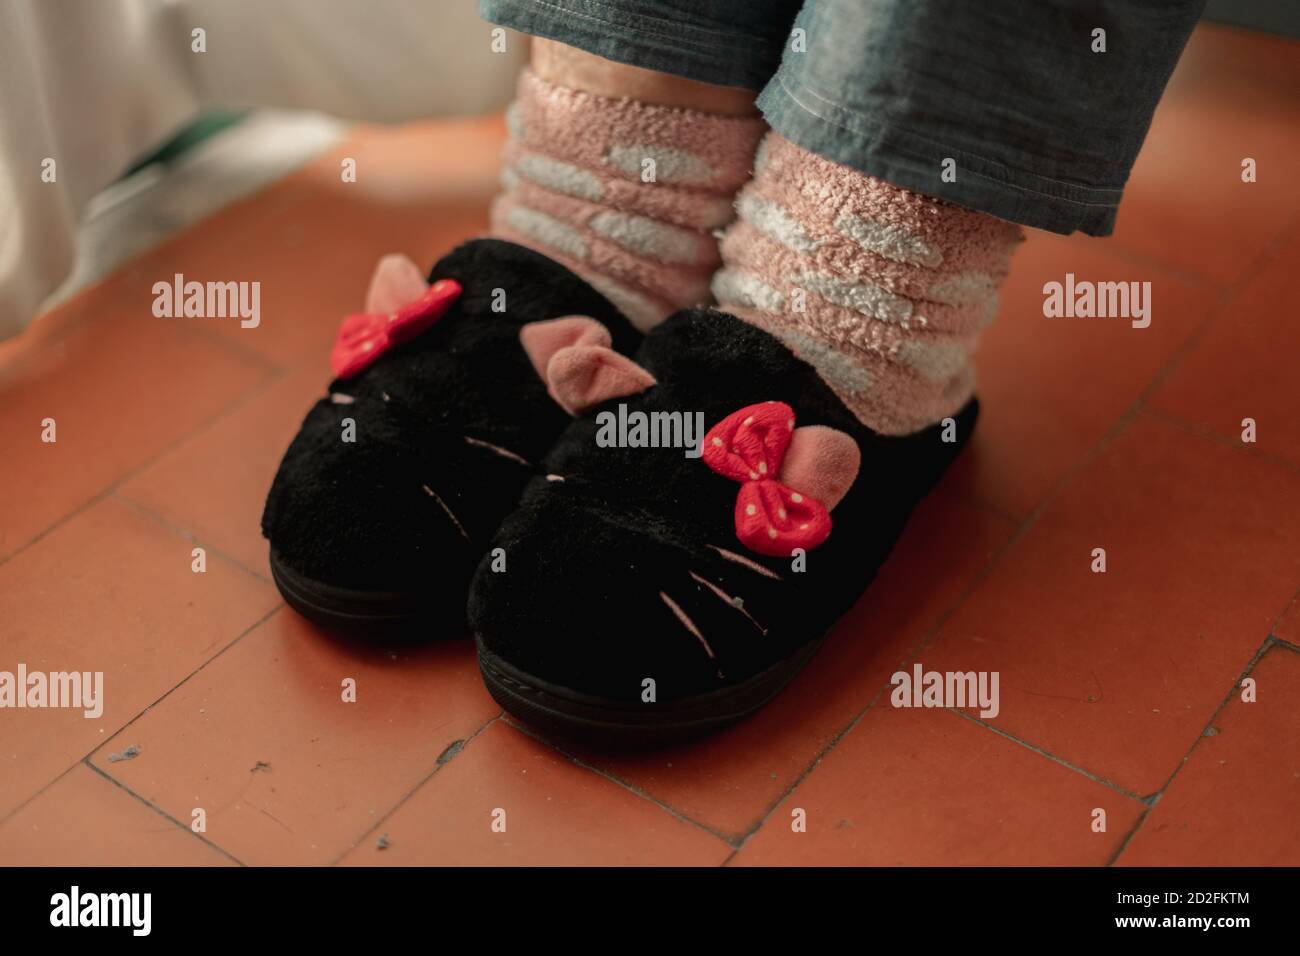 Close up photo of a pair of slipper shaped with cat faces and a pair of soft socks. Stock Photo